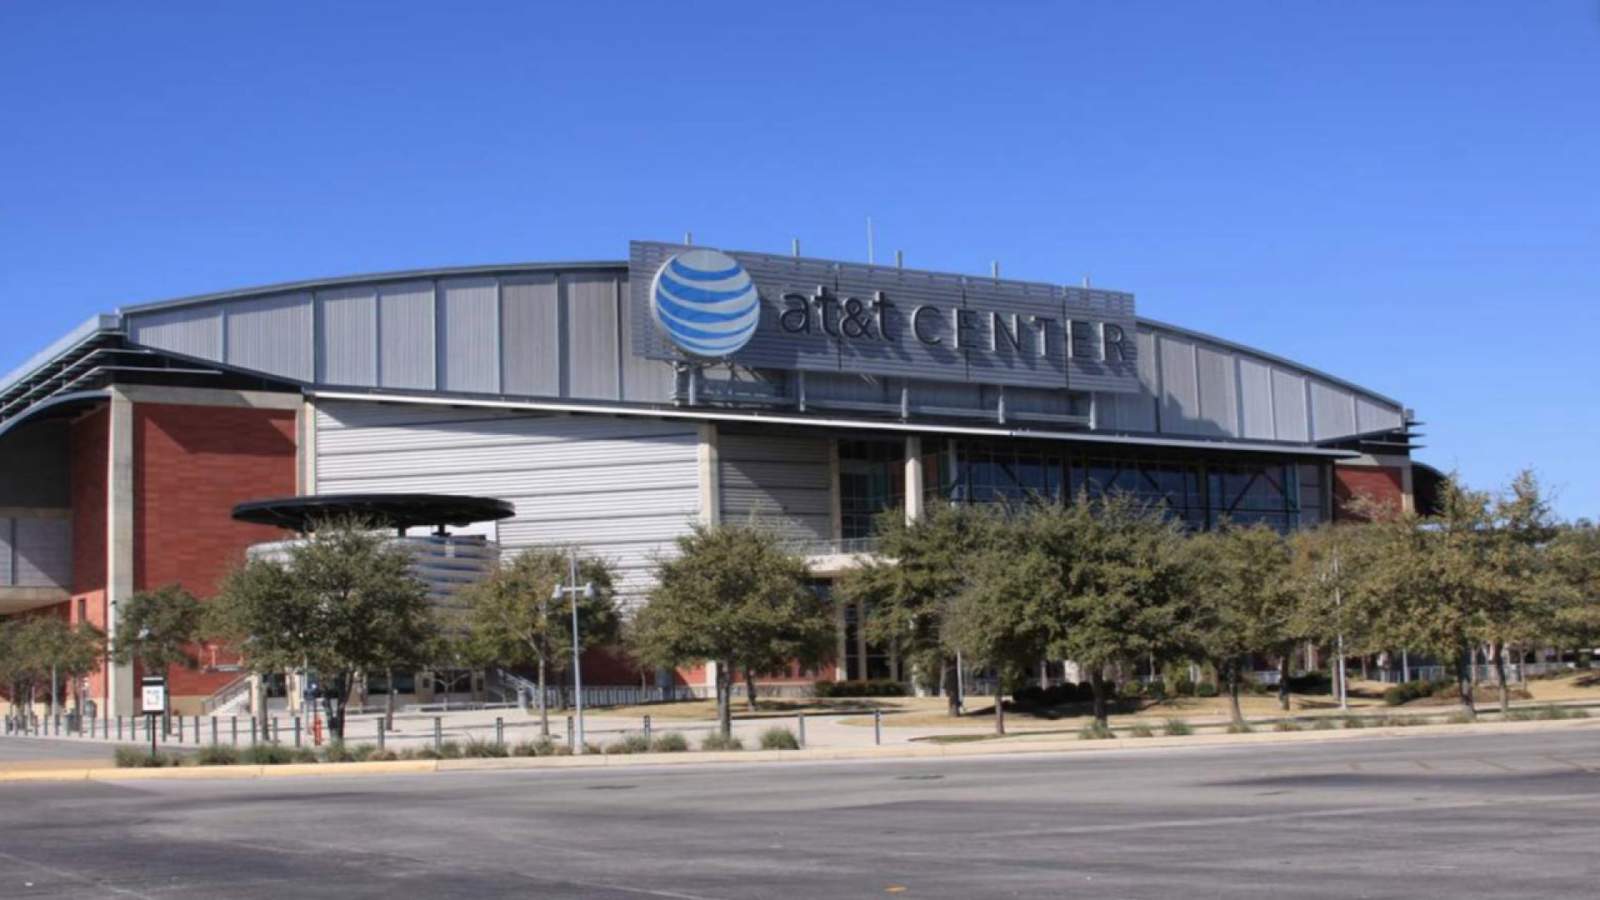 COVID-19 testing to end at AT&T center, will move to Rackspace and Barshop Jewish Community Center